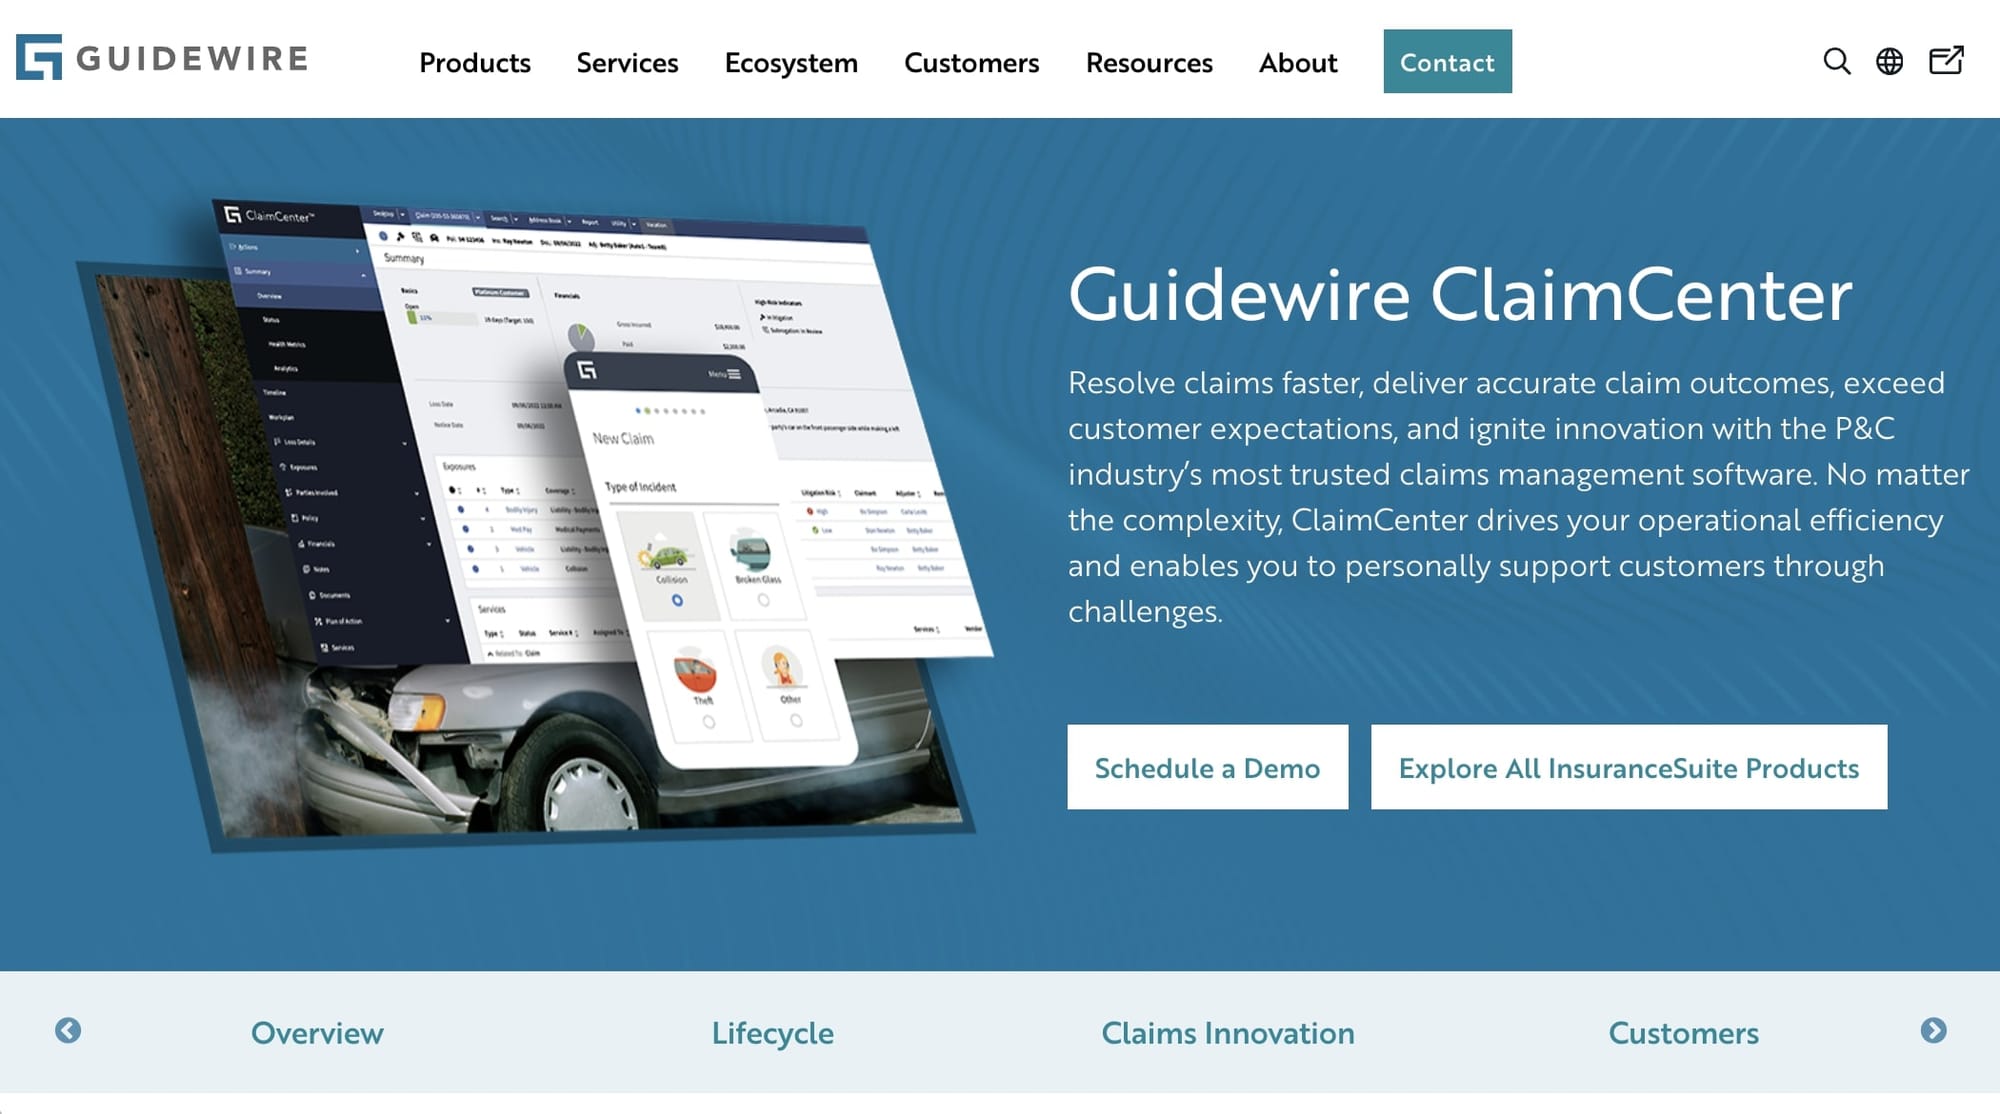 Guidewire insurance claims management